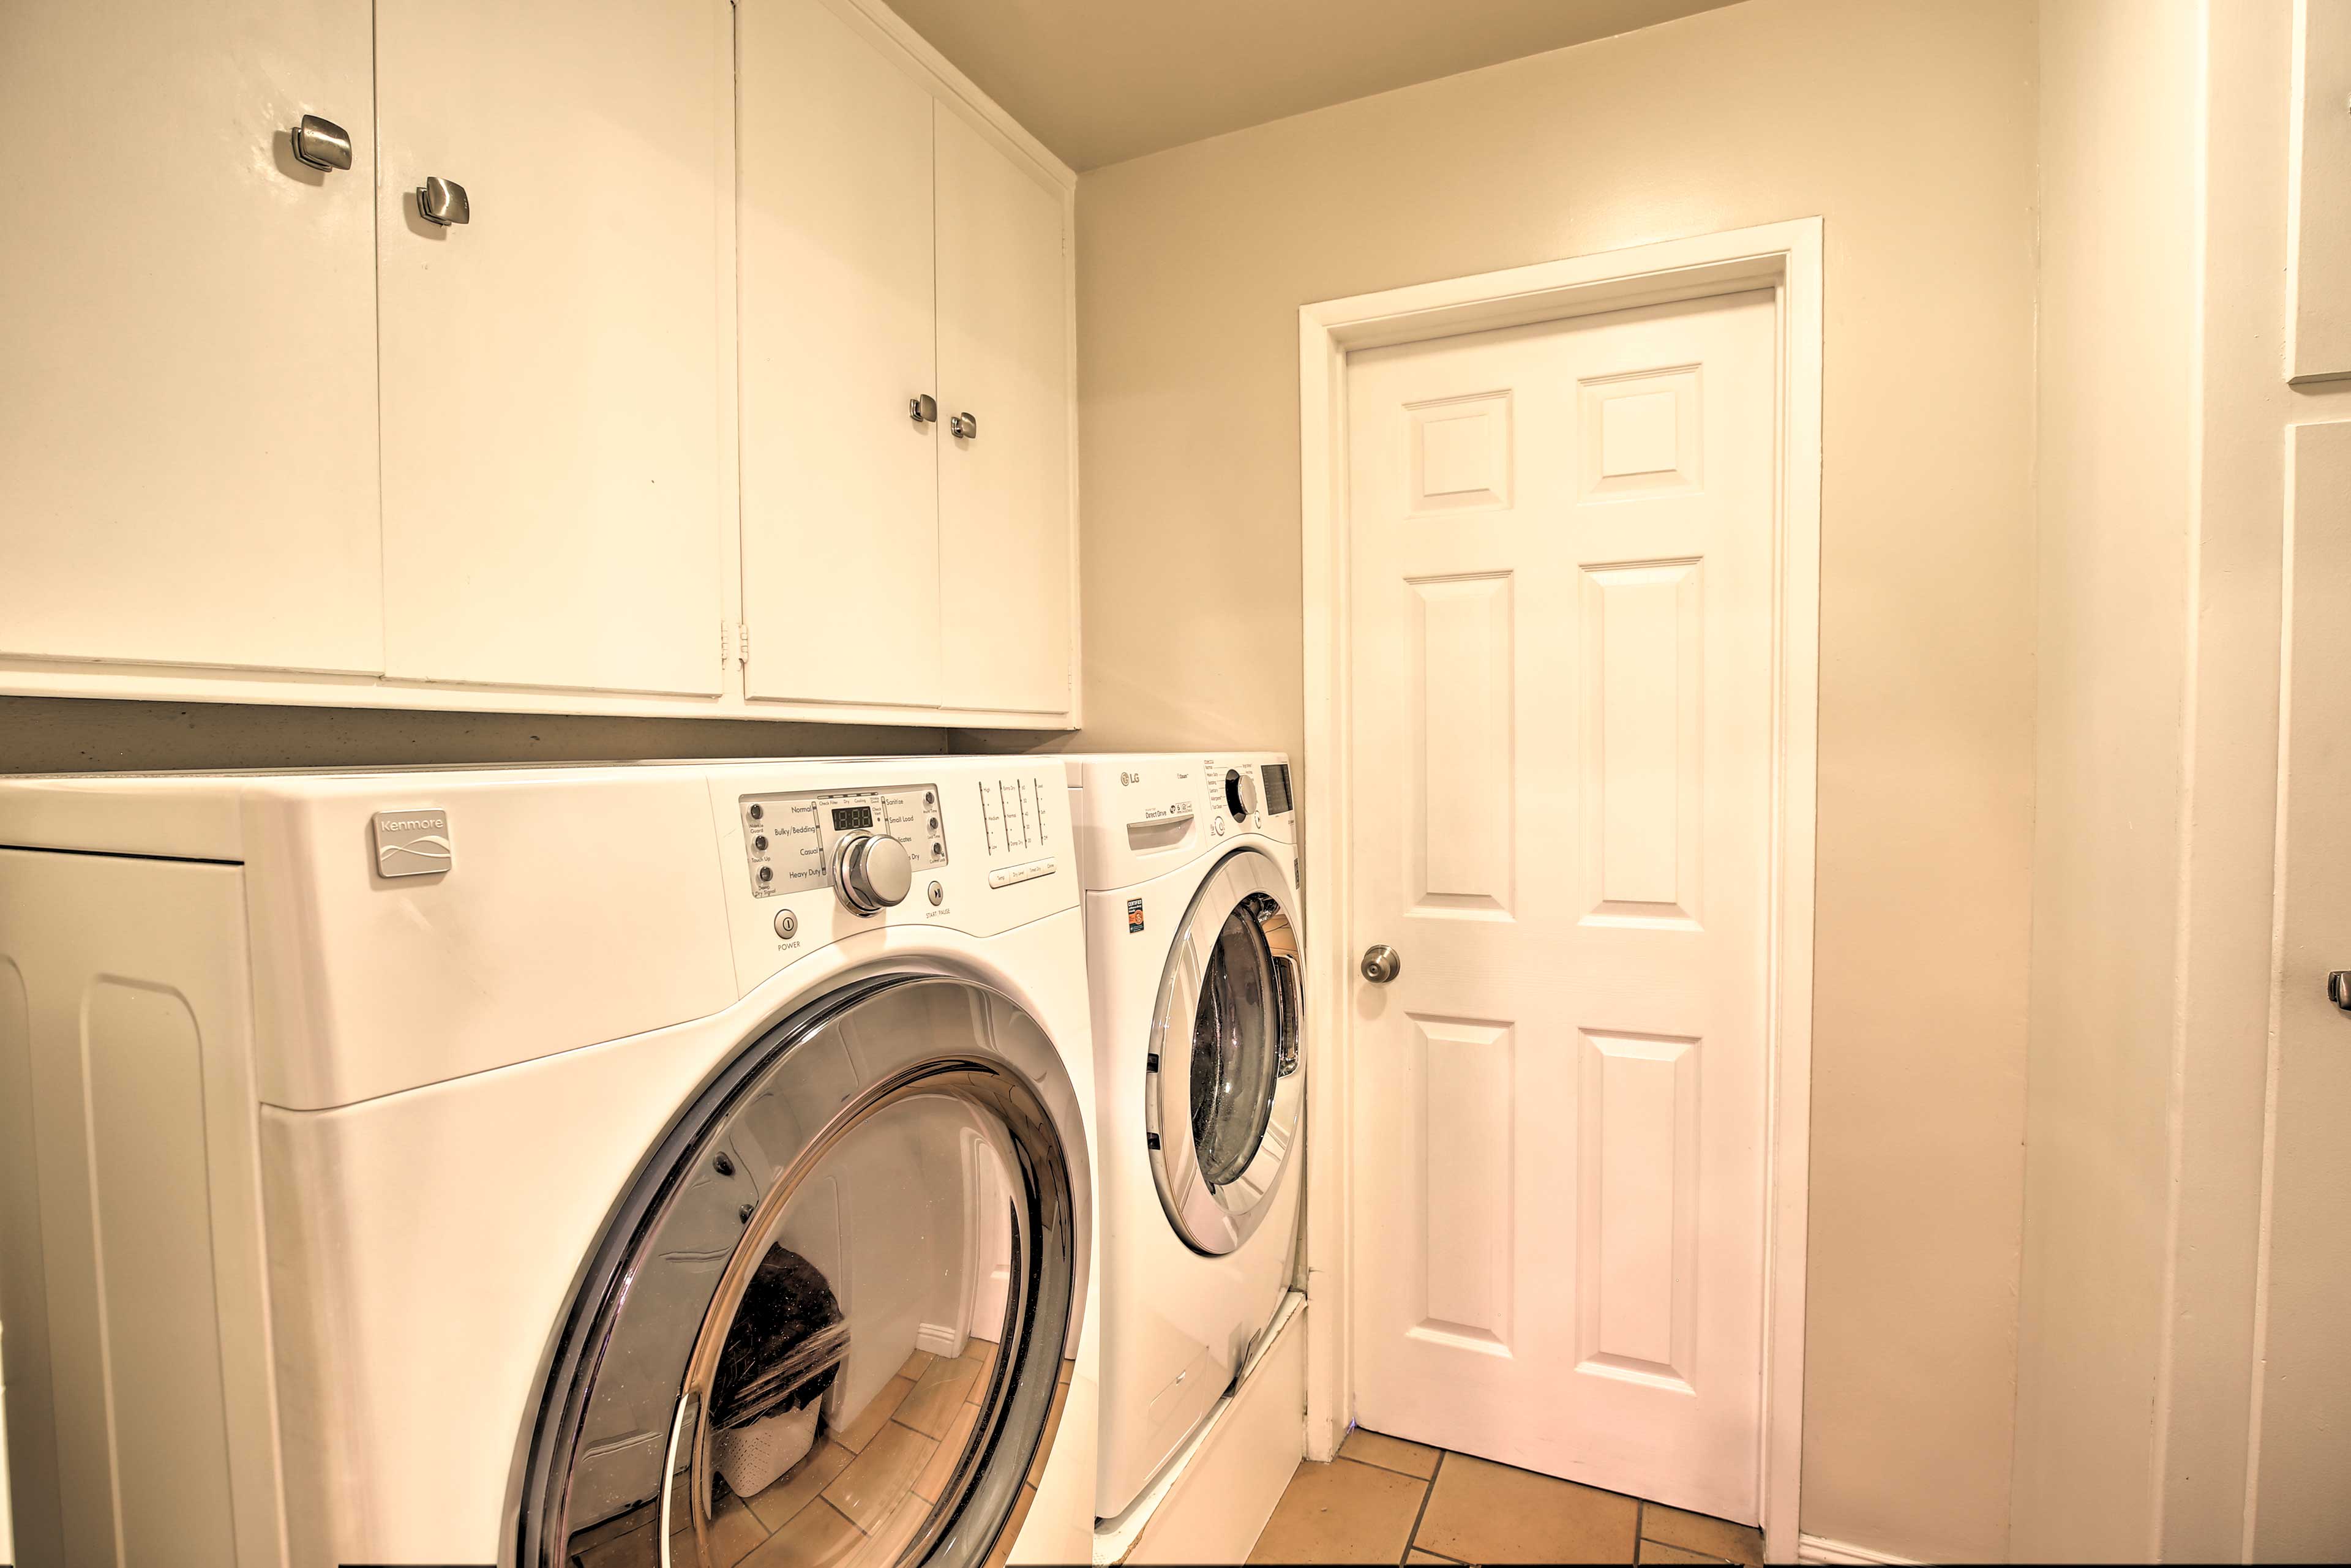 Keep your wardrobe fresh with the home's laundry machines.